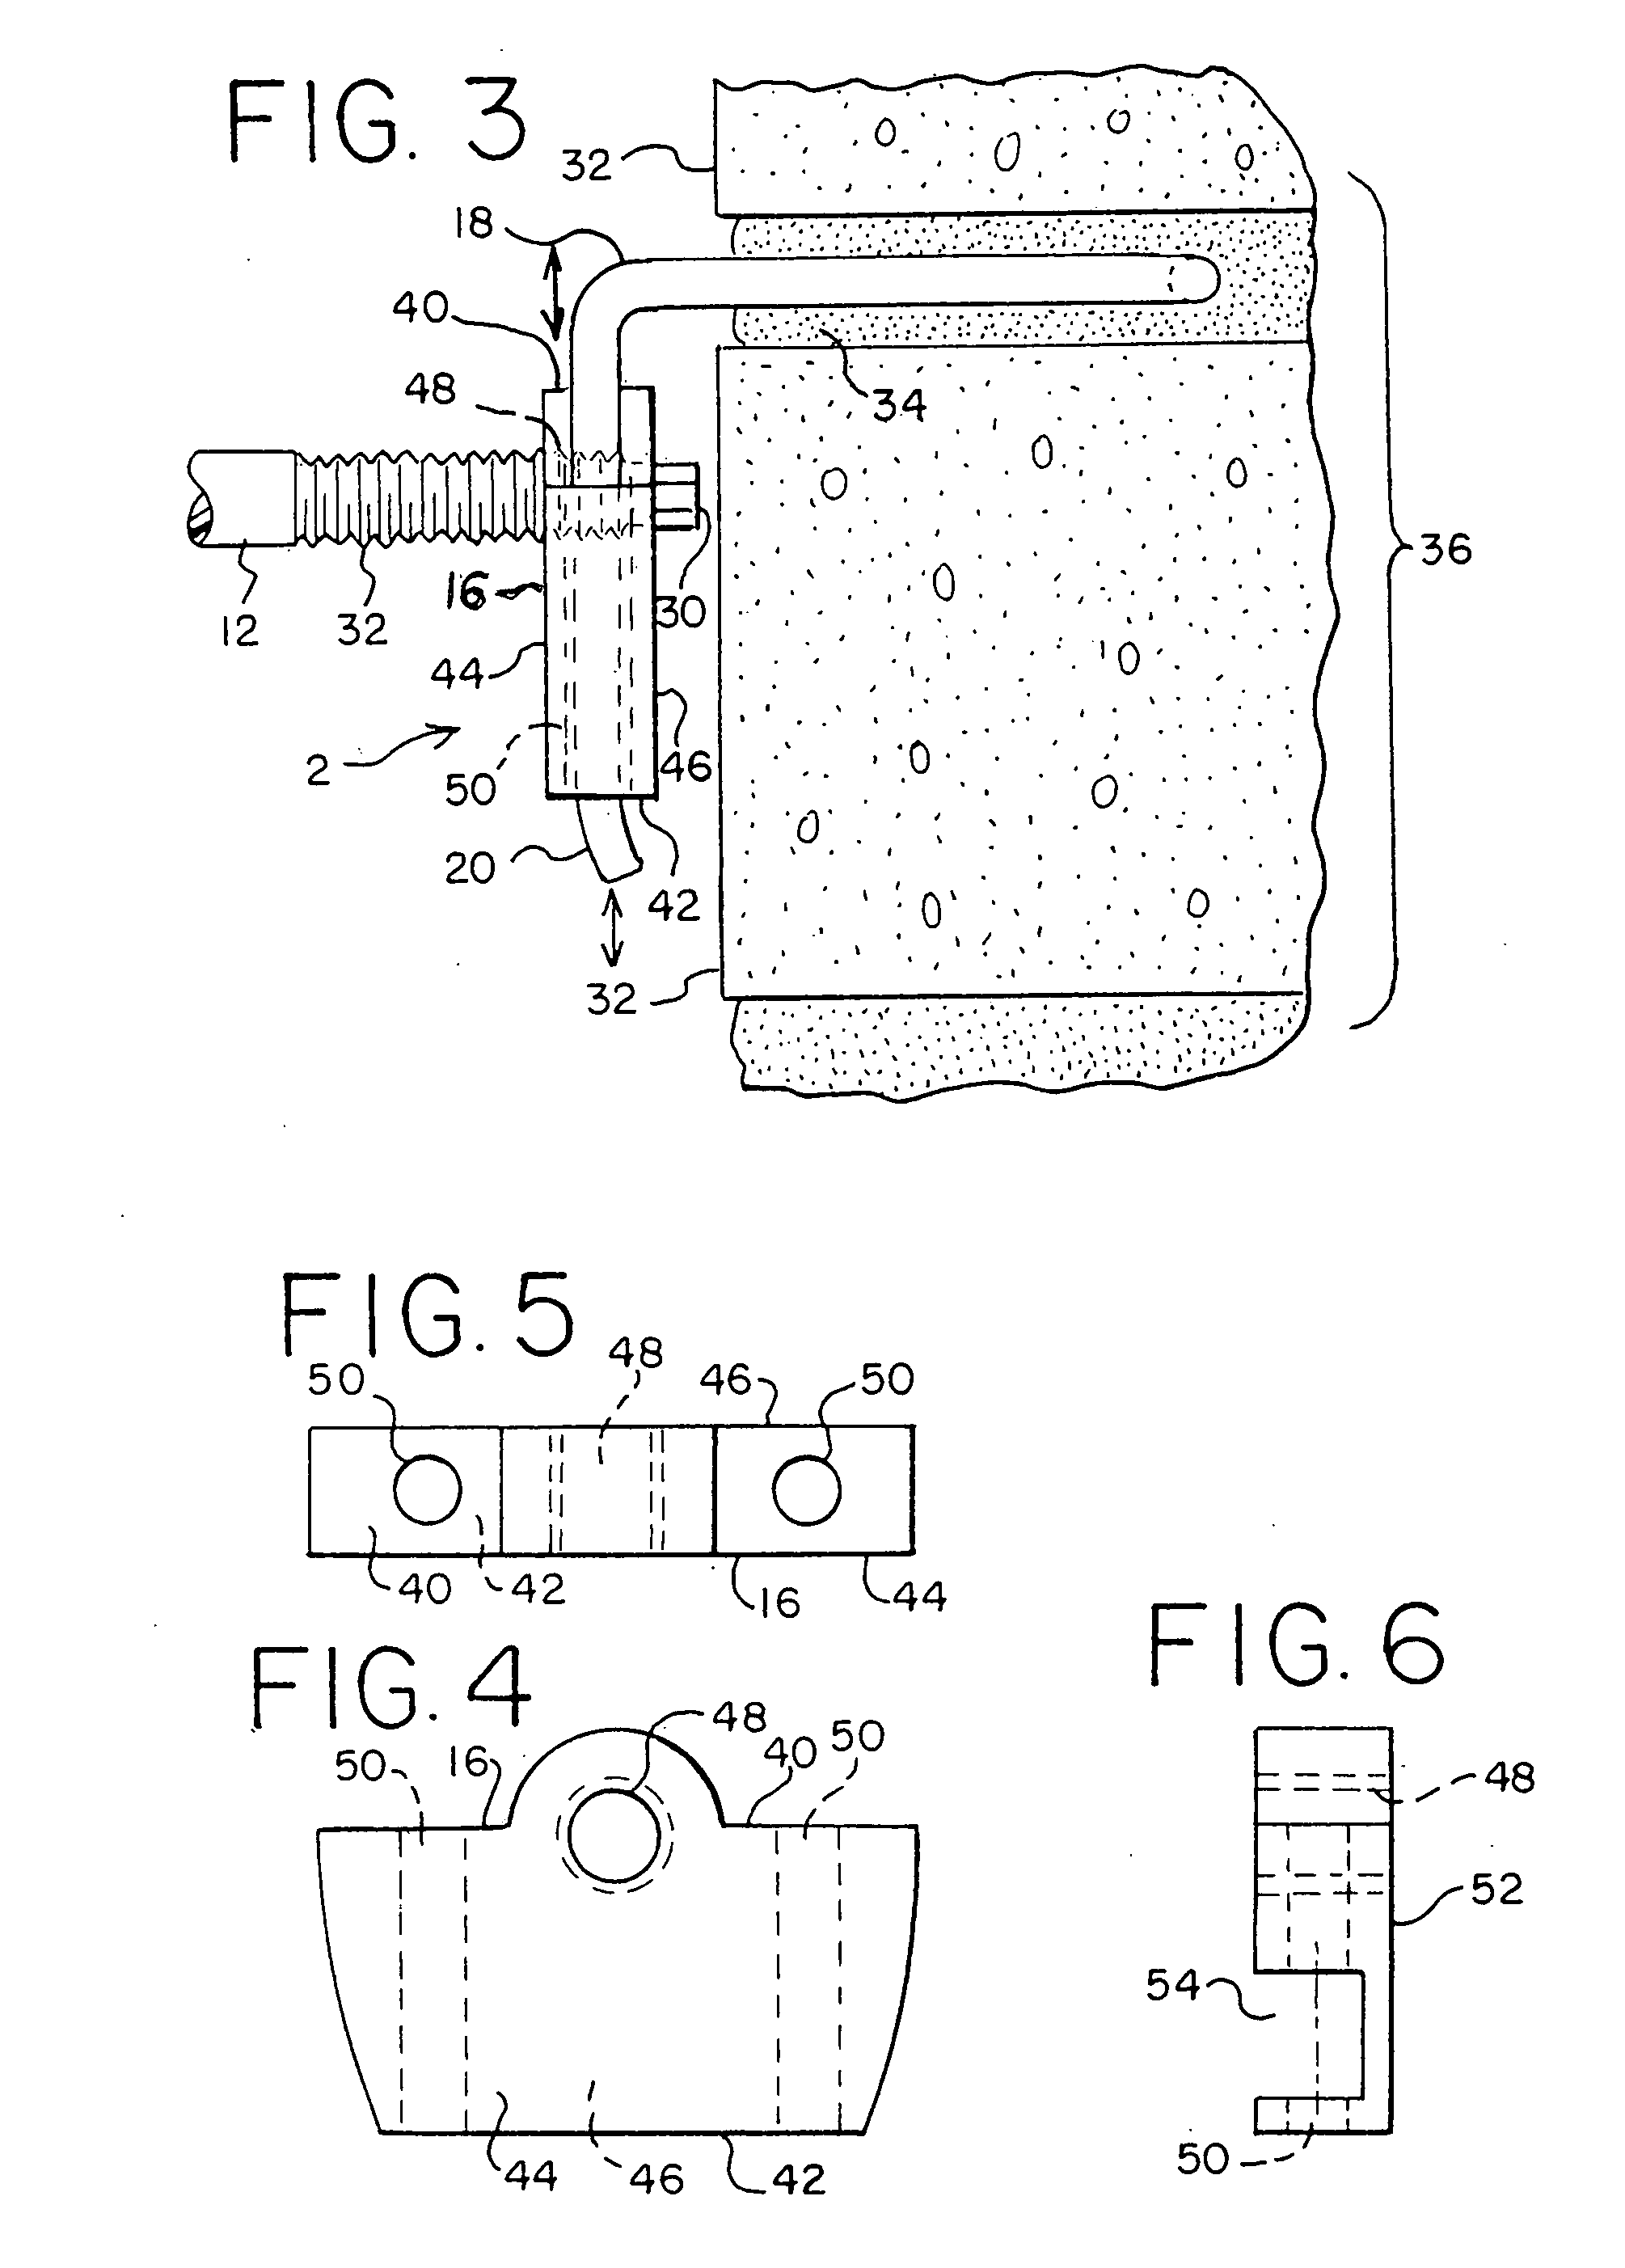 Composite fastener, belly nut, tie system and/or method for reducing heat transfer through a building envelope